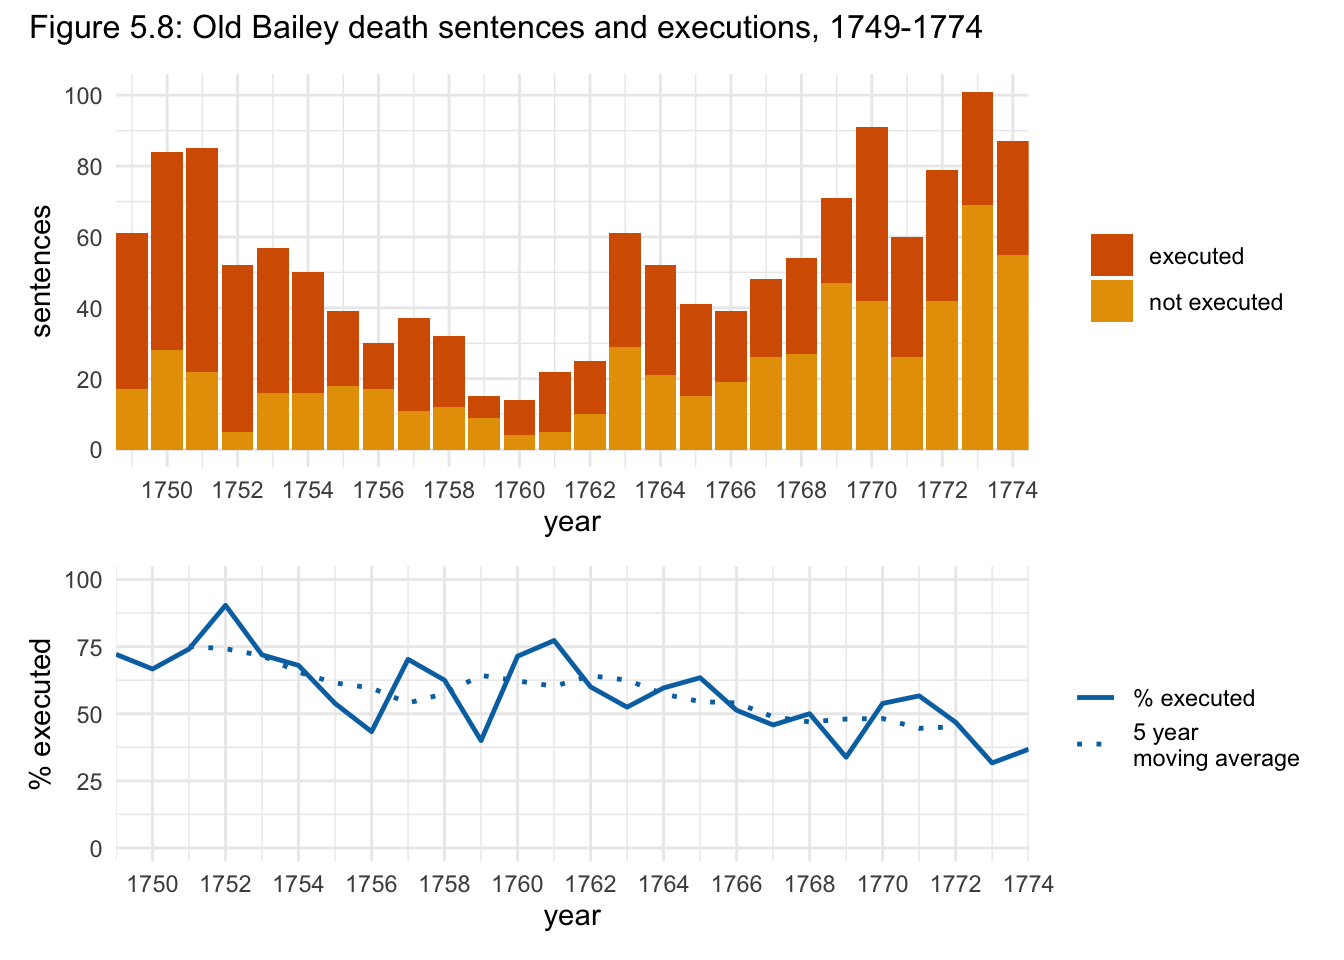 Figure 5.8: Old Bailey death sentences and executions, 1749-1774.